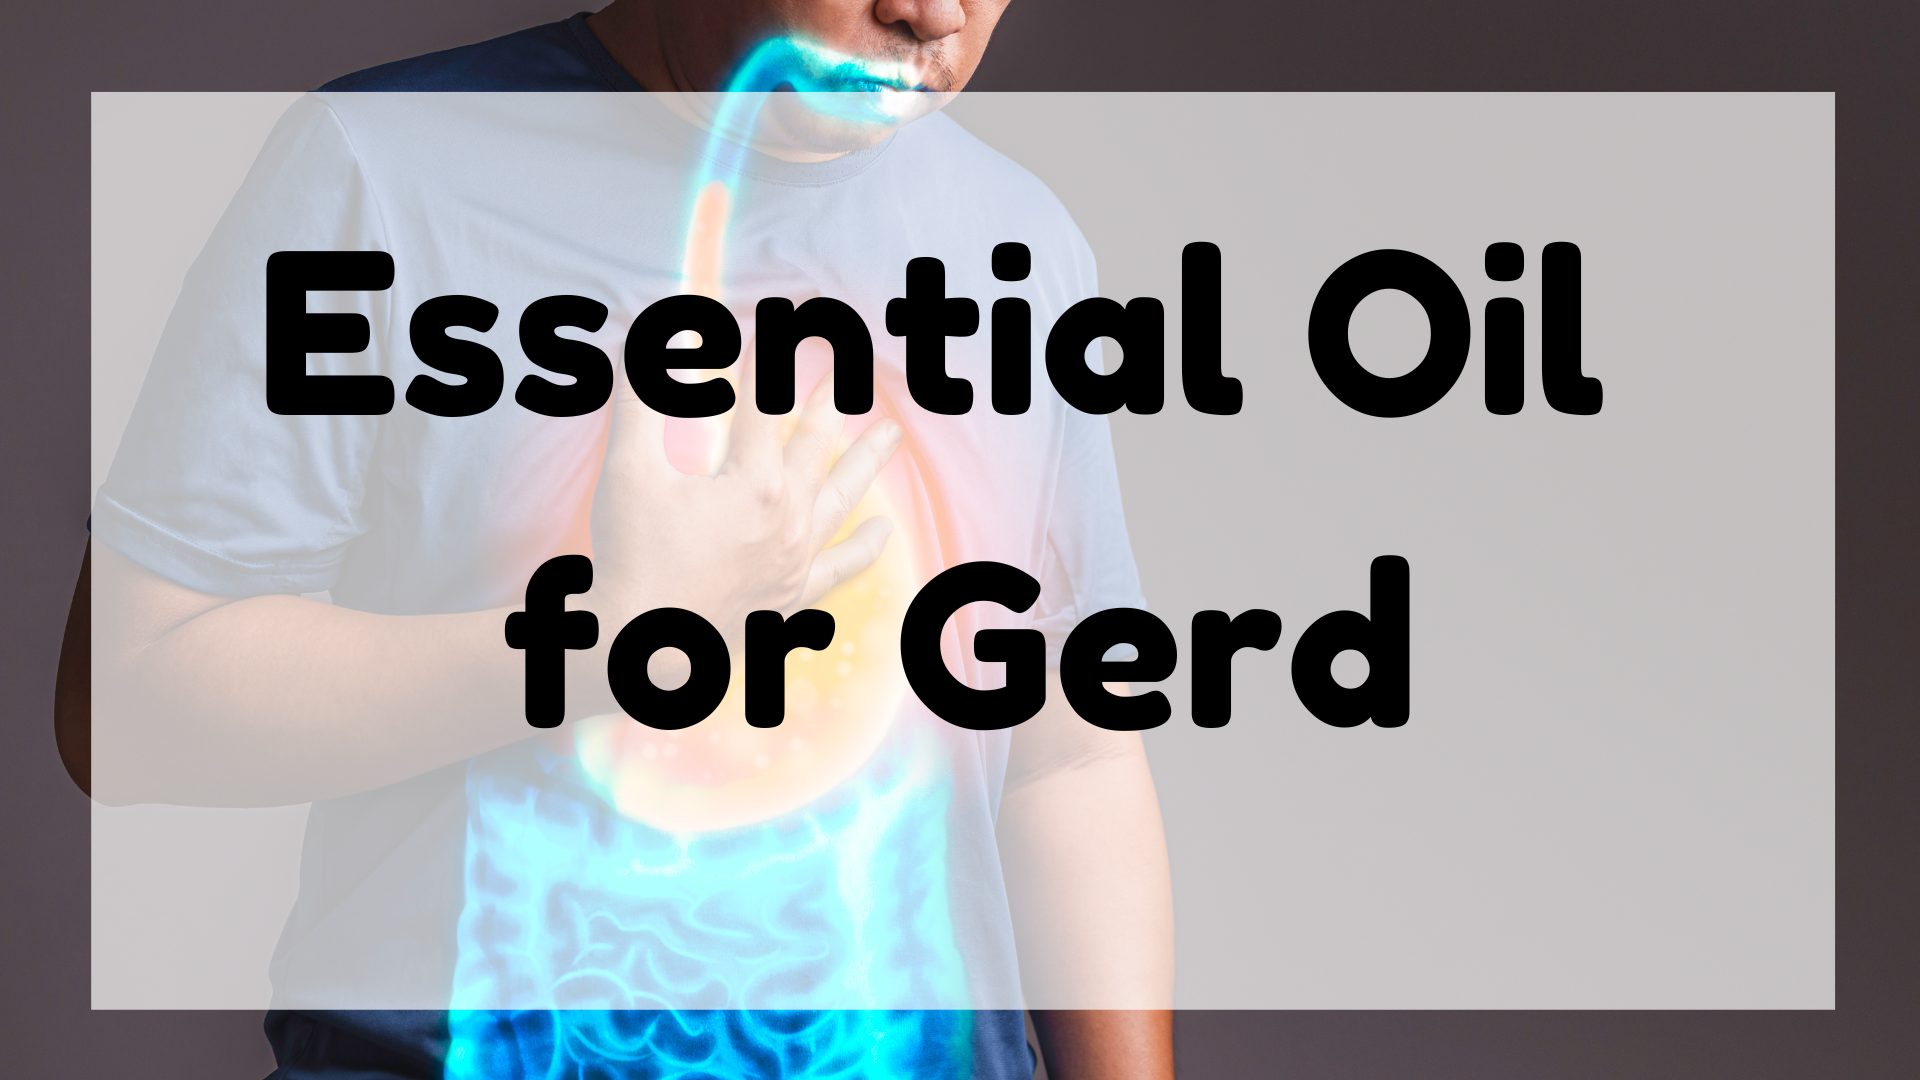 Essential Oil for Gerd featured image